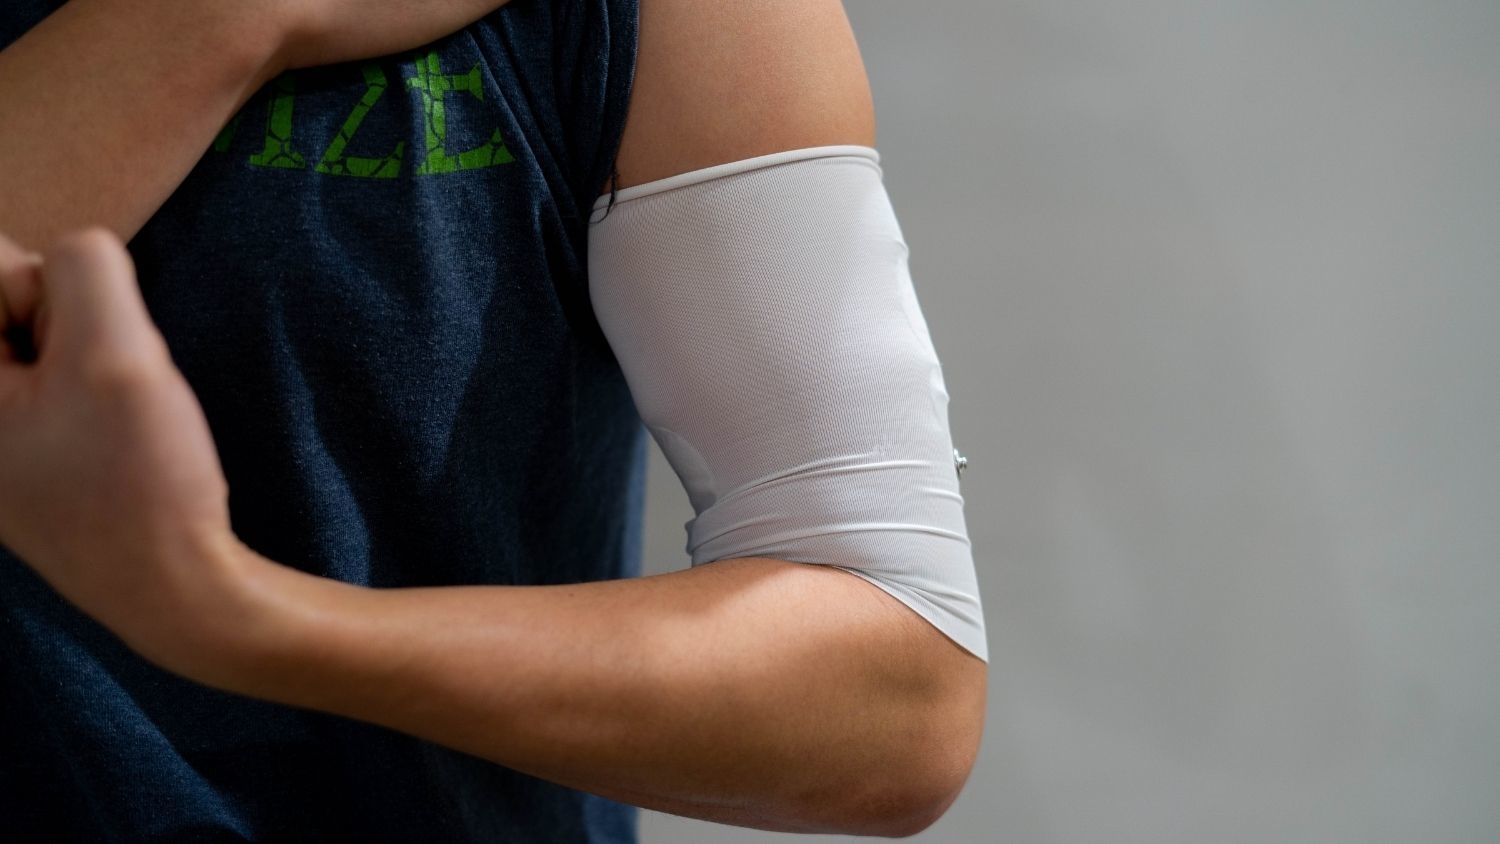 Researchers are developing an armband that can track heart rate.